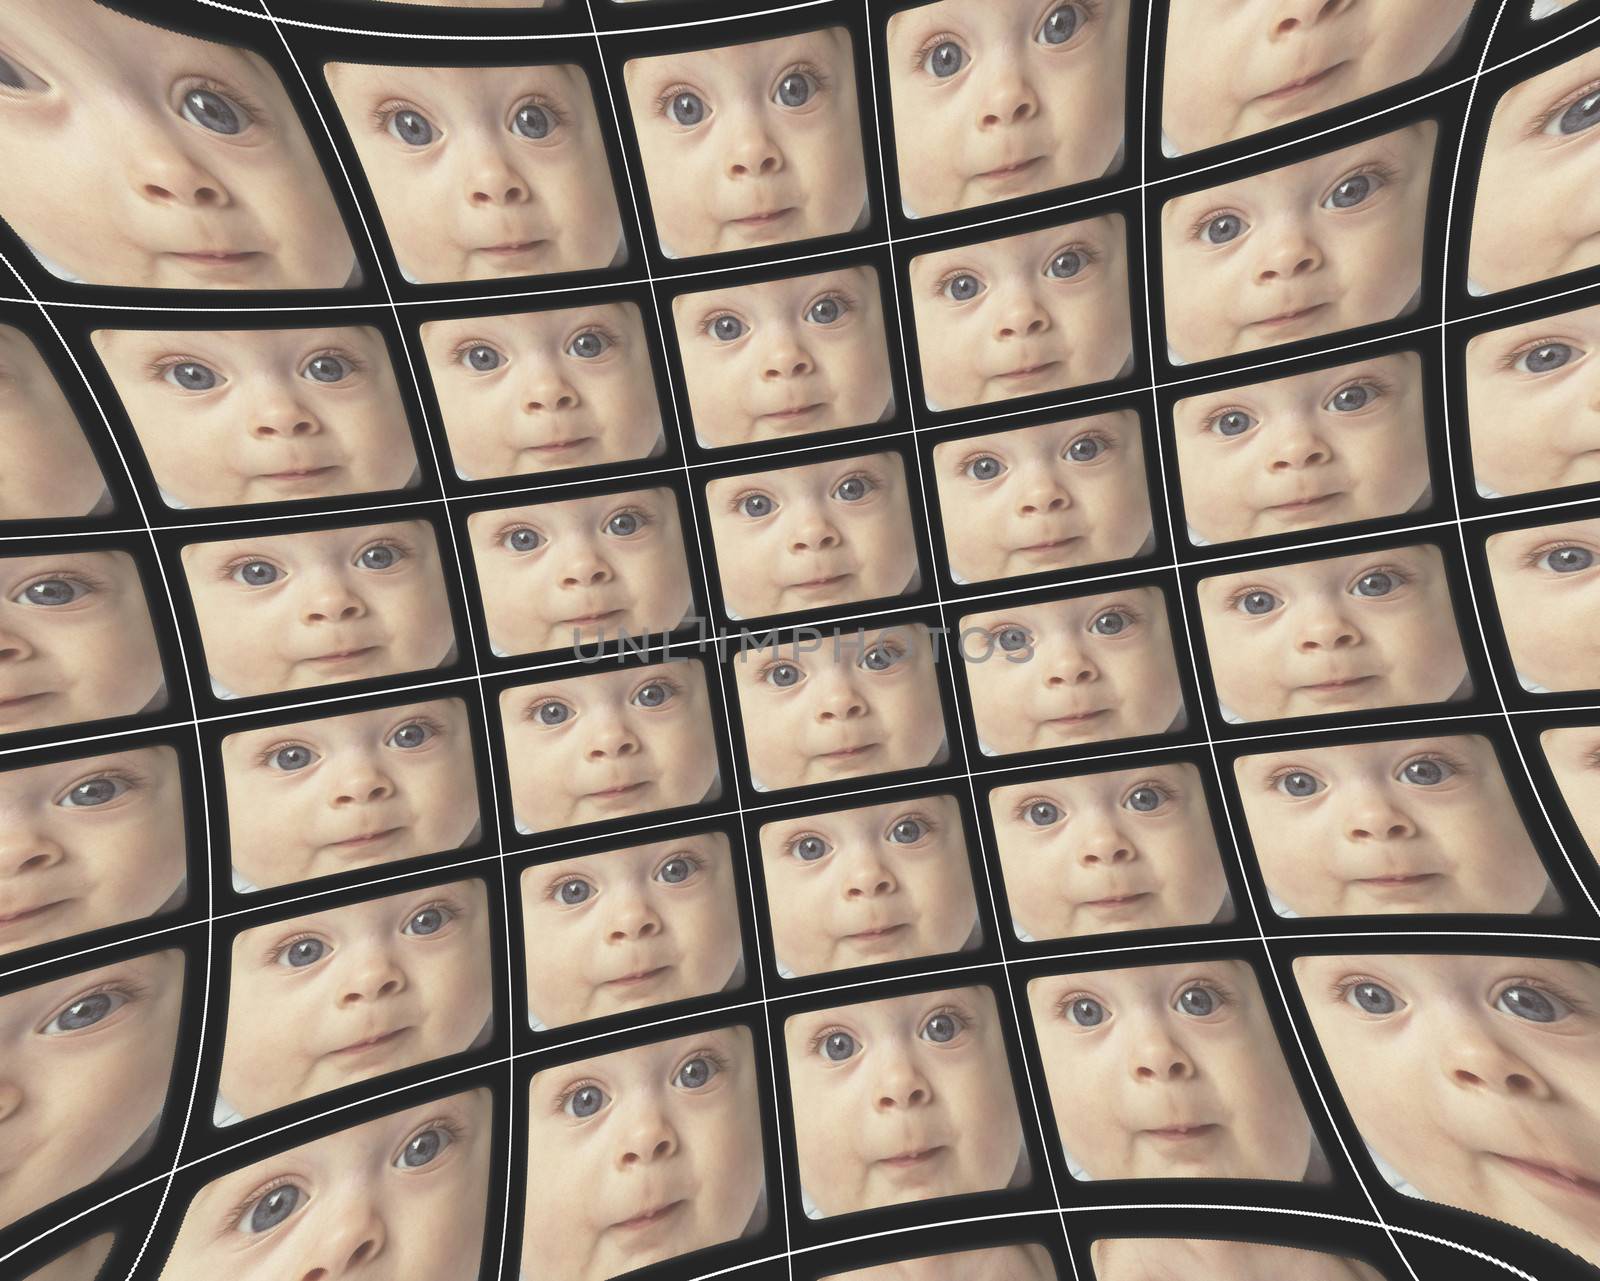 Distorted video screens showing the identical faces of a baby